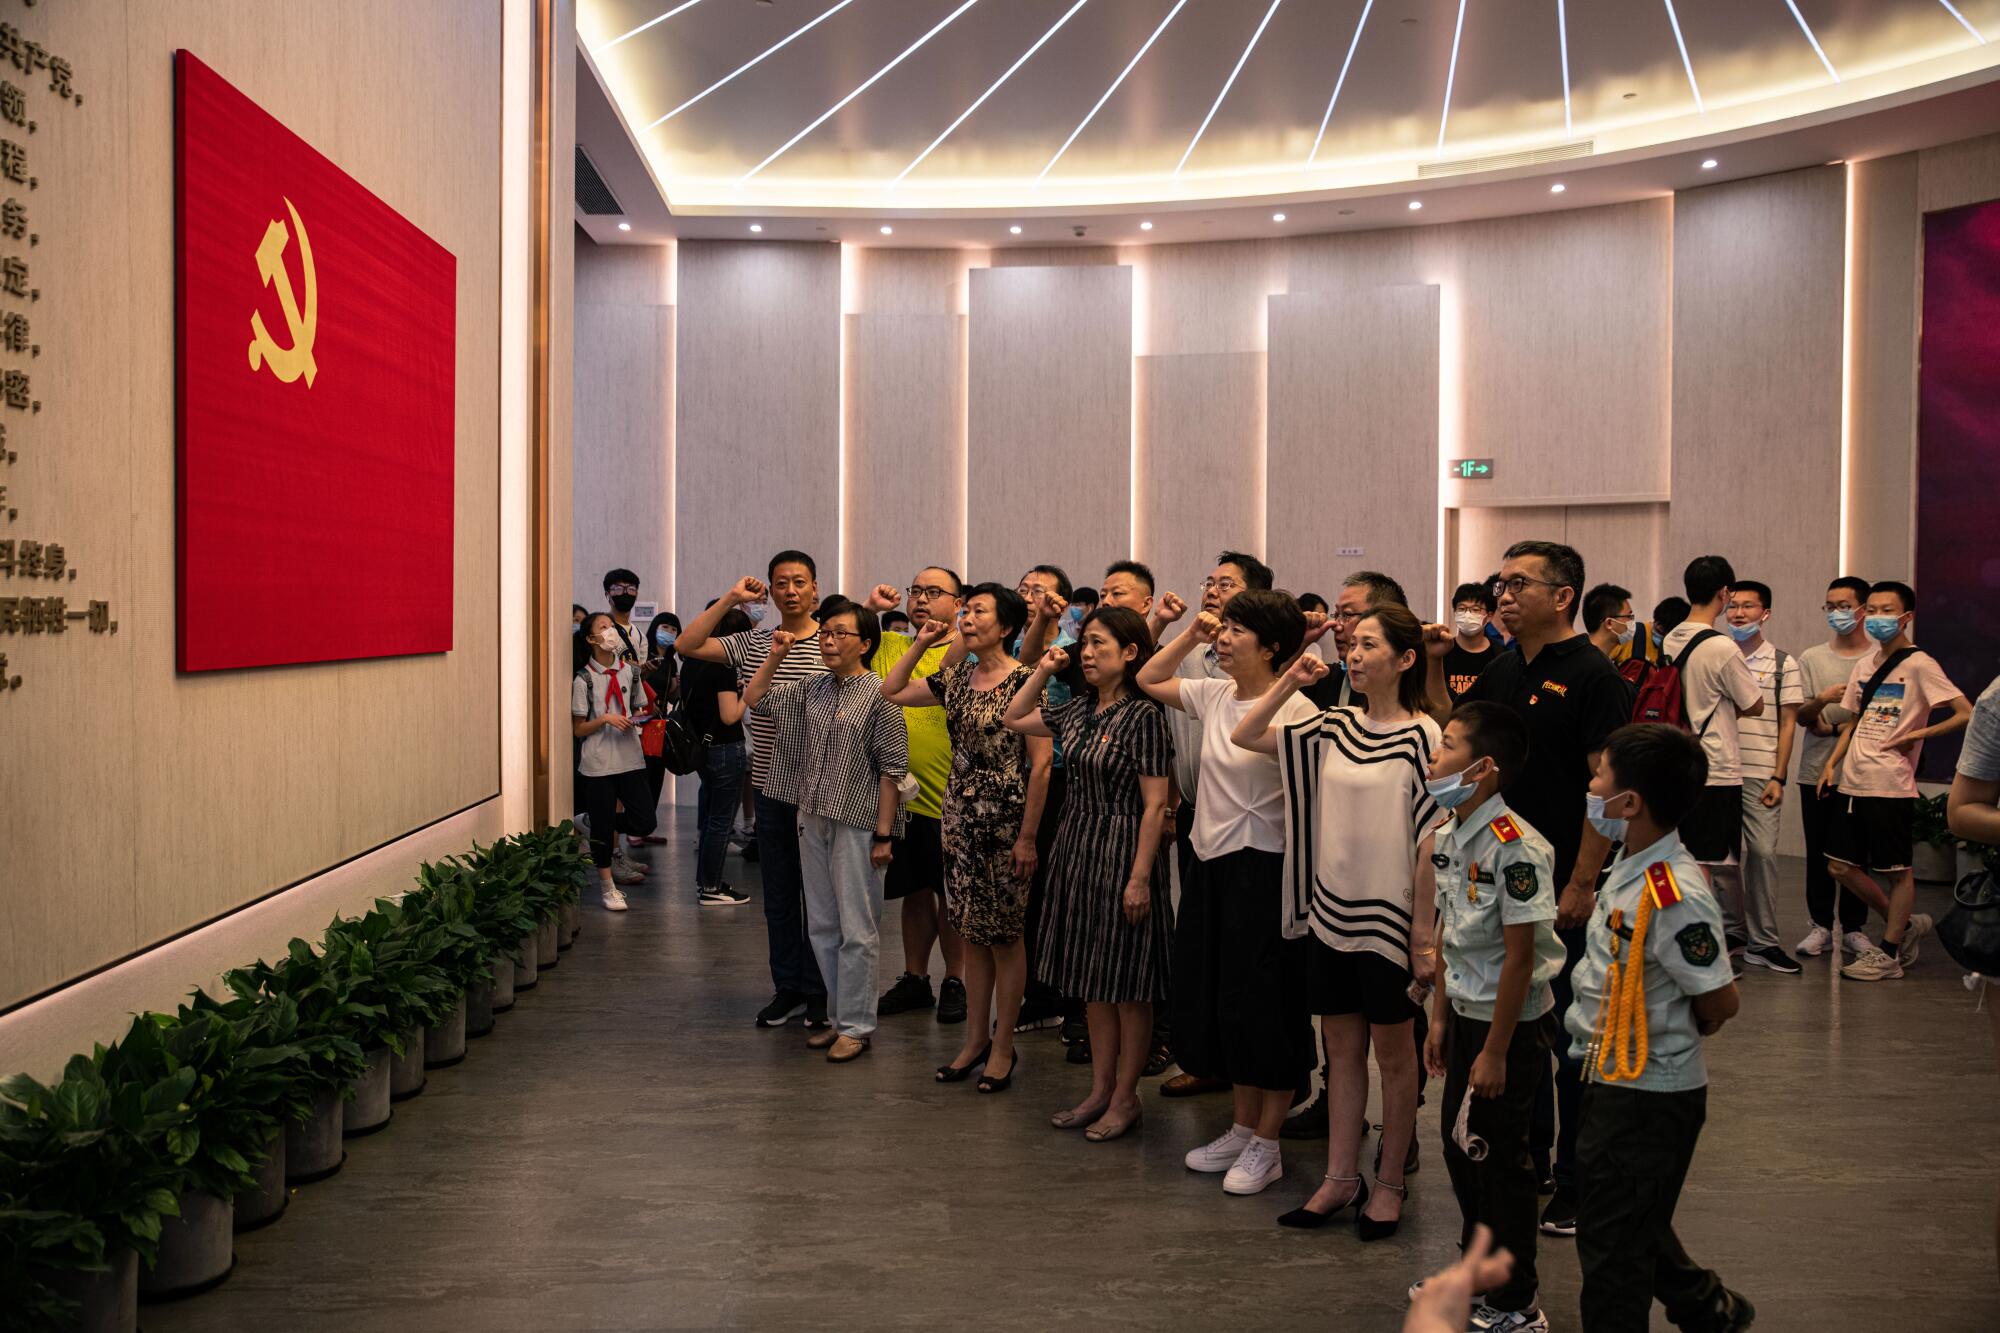 A group of people raise fisted hands as they stand before a red flag with a yellow hammer and sickle symbol on a wall 